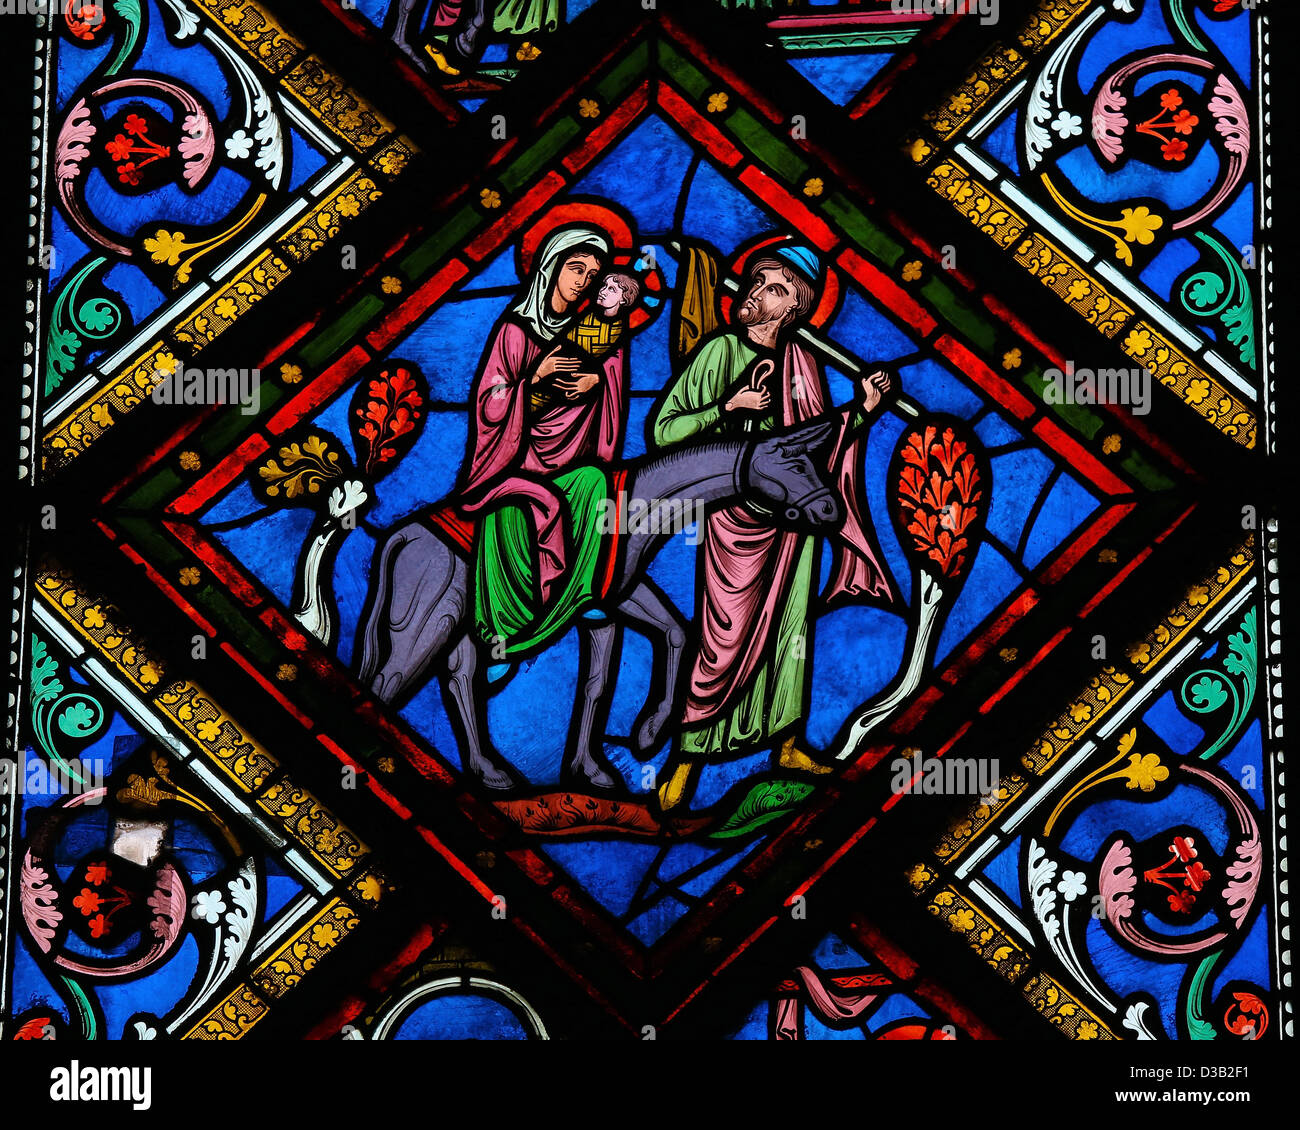 Stained glass window depicting the Holy Family in Bethlehem Stock Photo